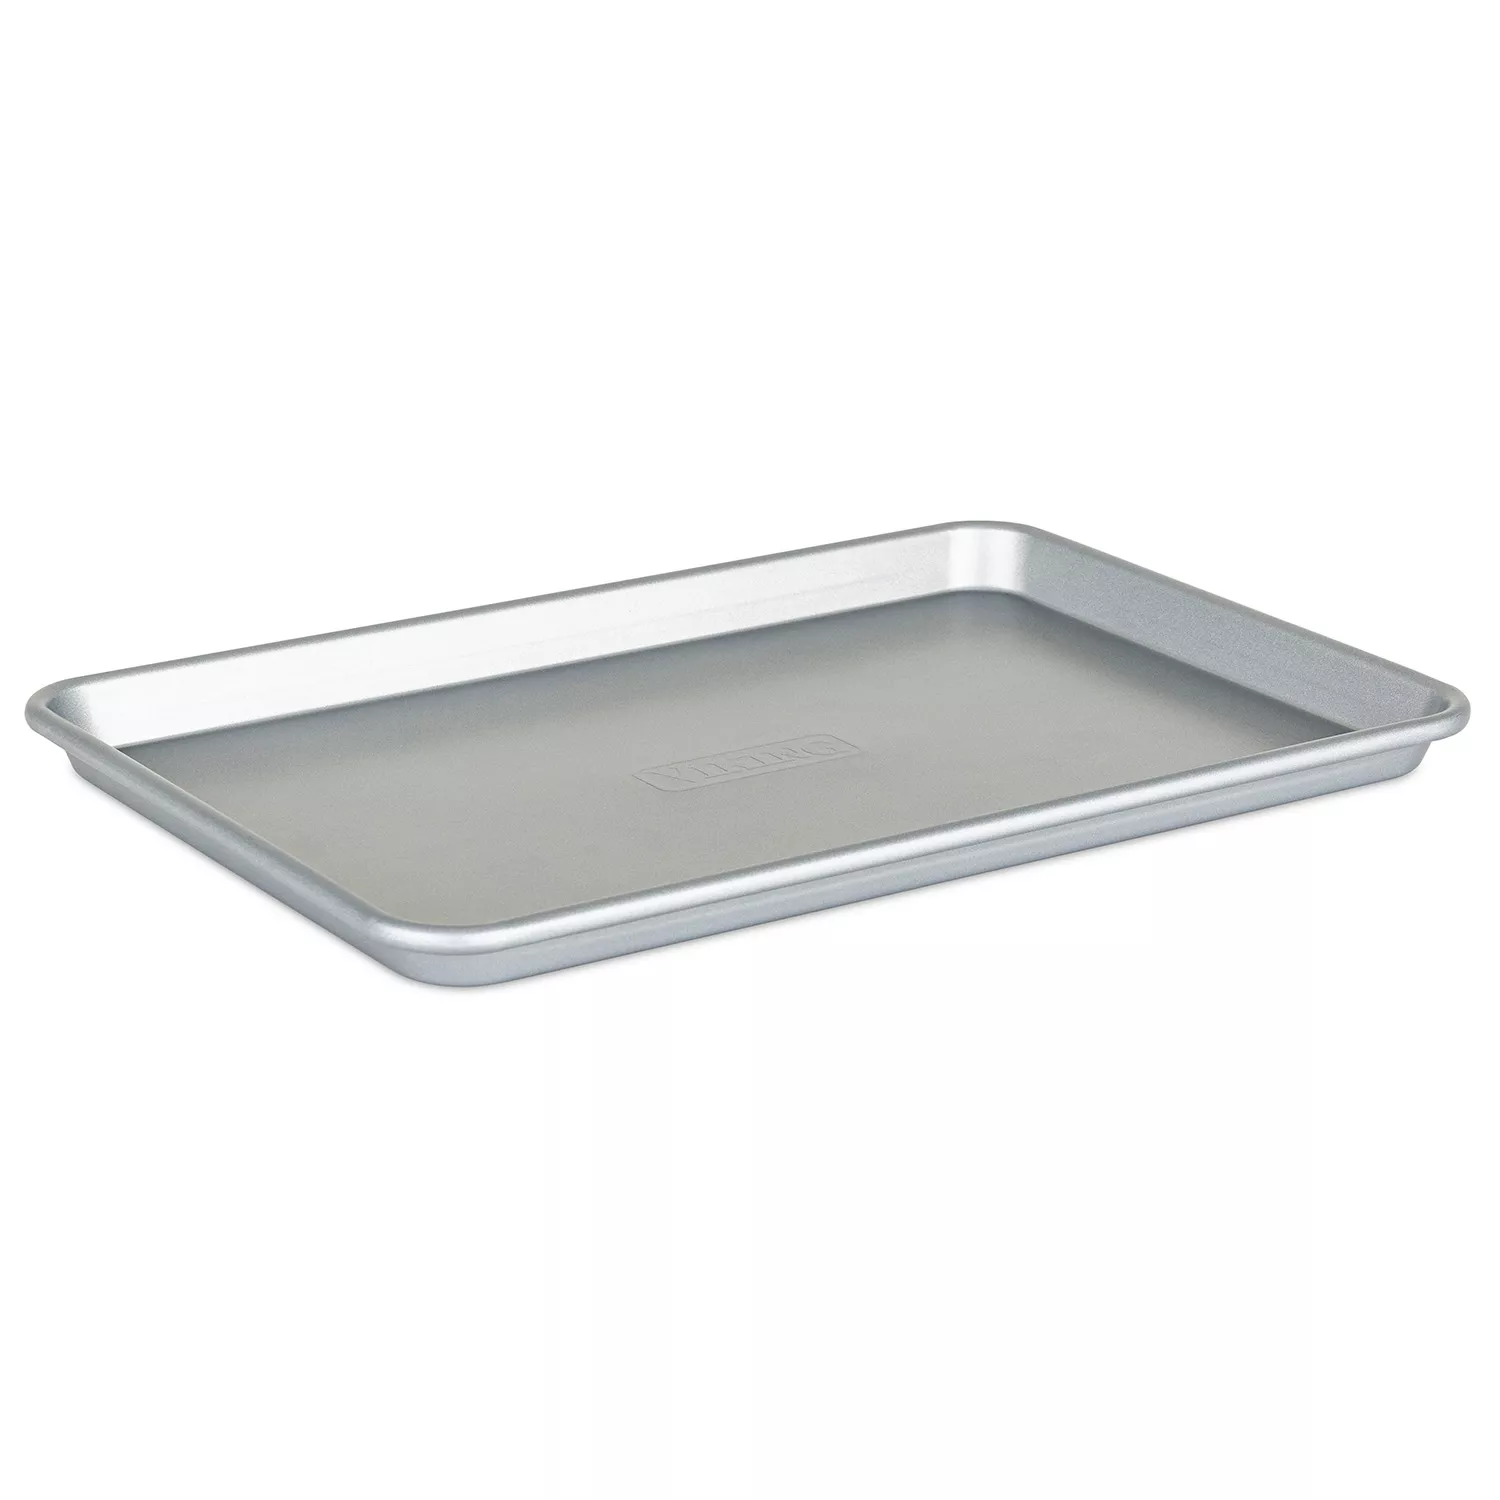 USA Pan Bakeware Extra Large Sheet Pan, Warp Resistant Nonstick Baking Pan,  Made in the USA from Aluminized Steel